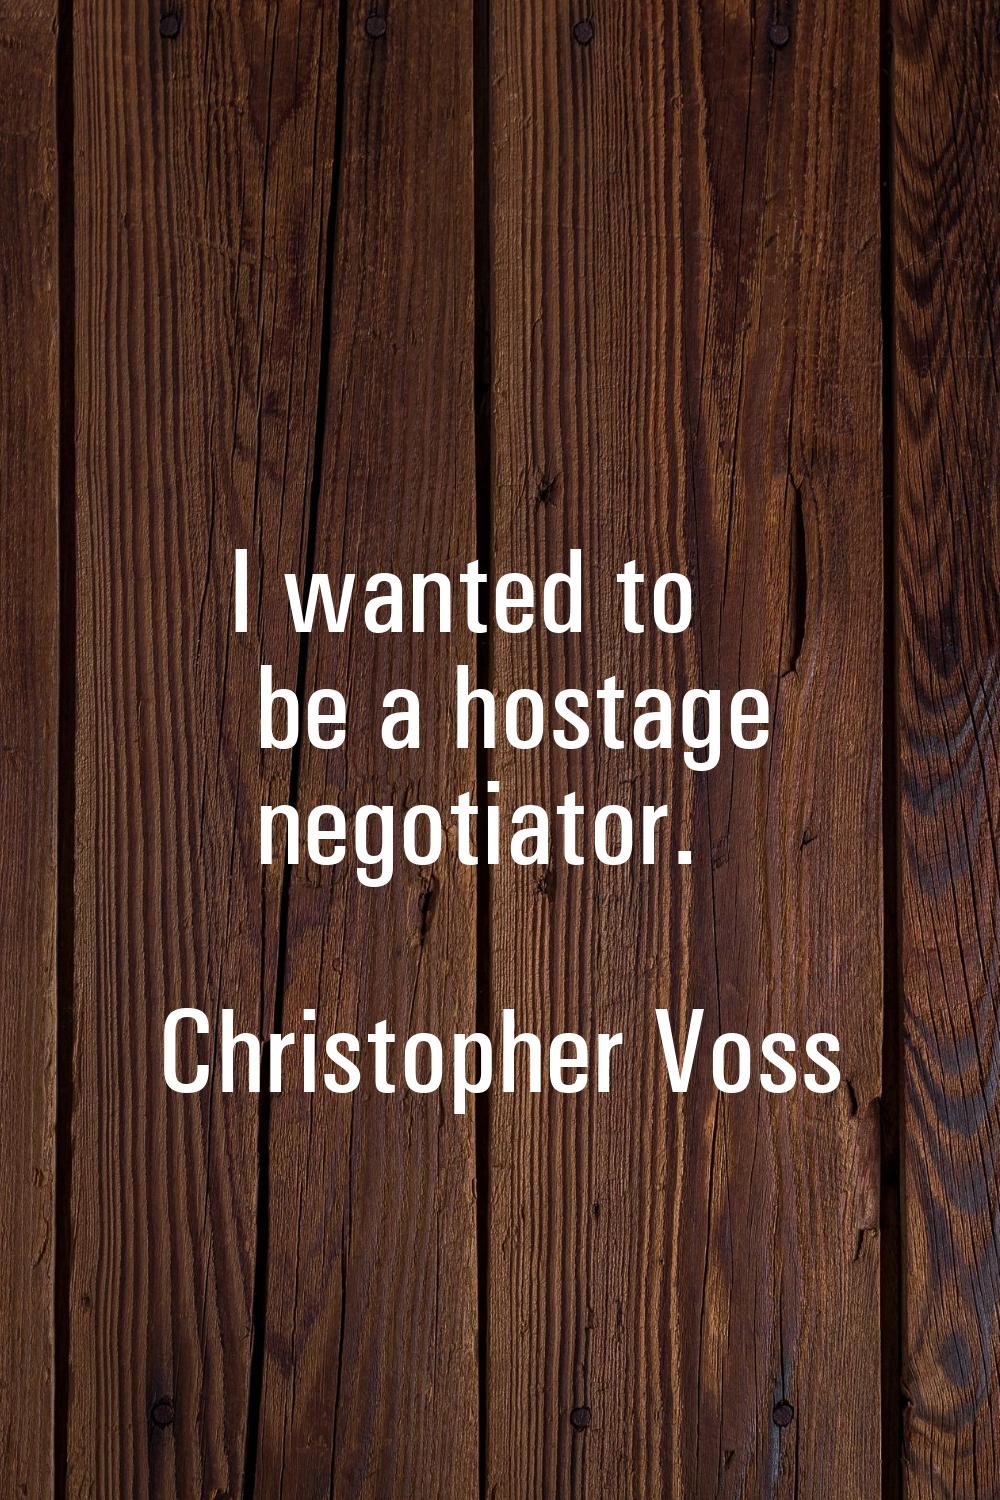 I wanted to be a hostage negotiator.